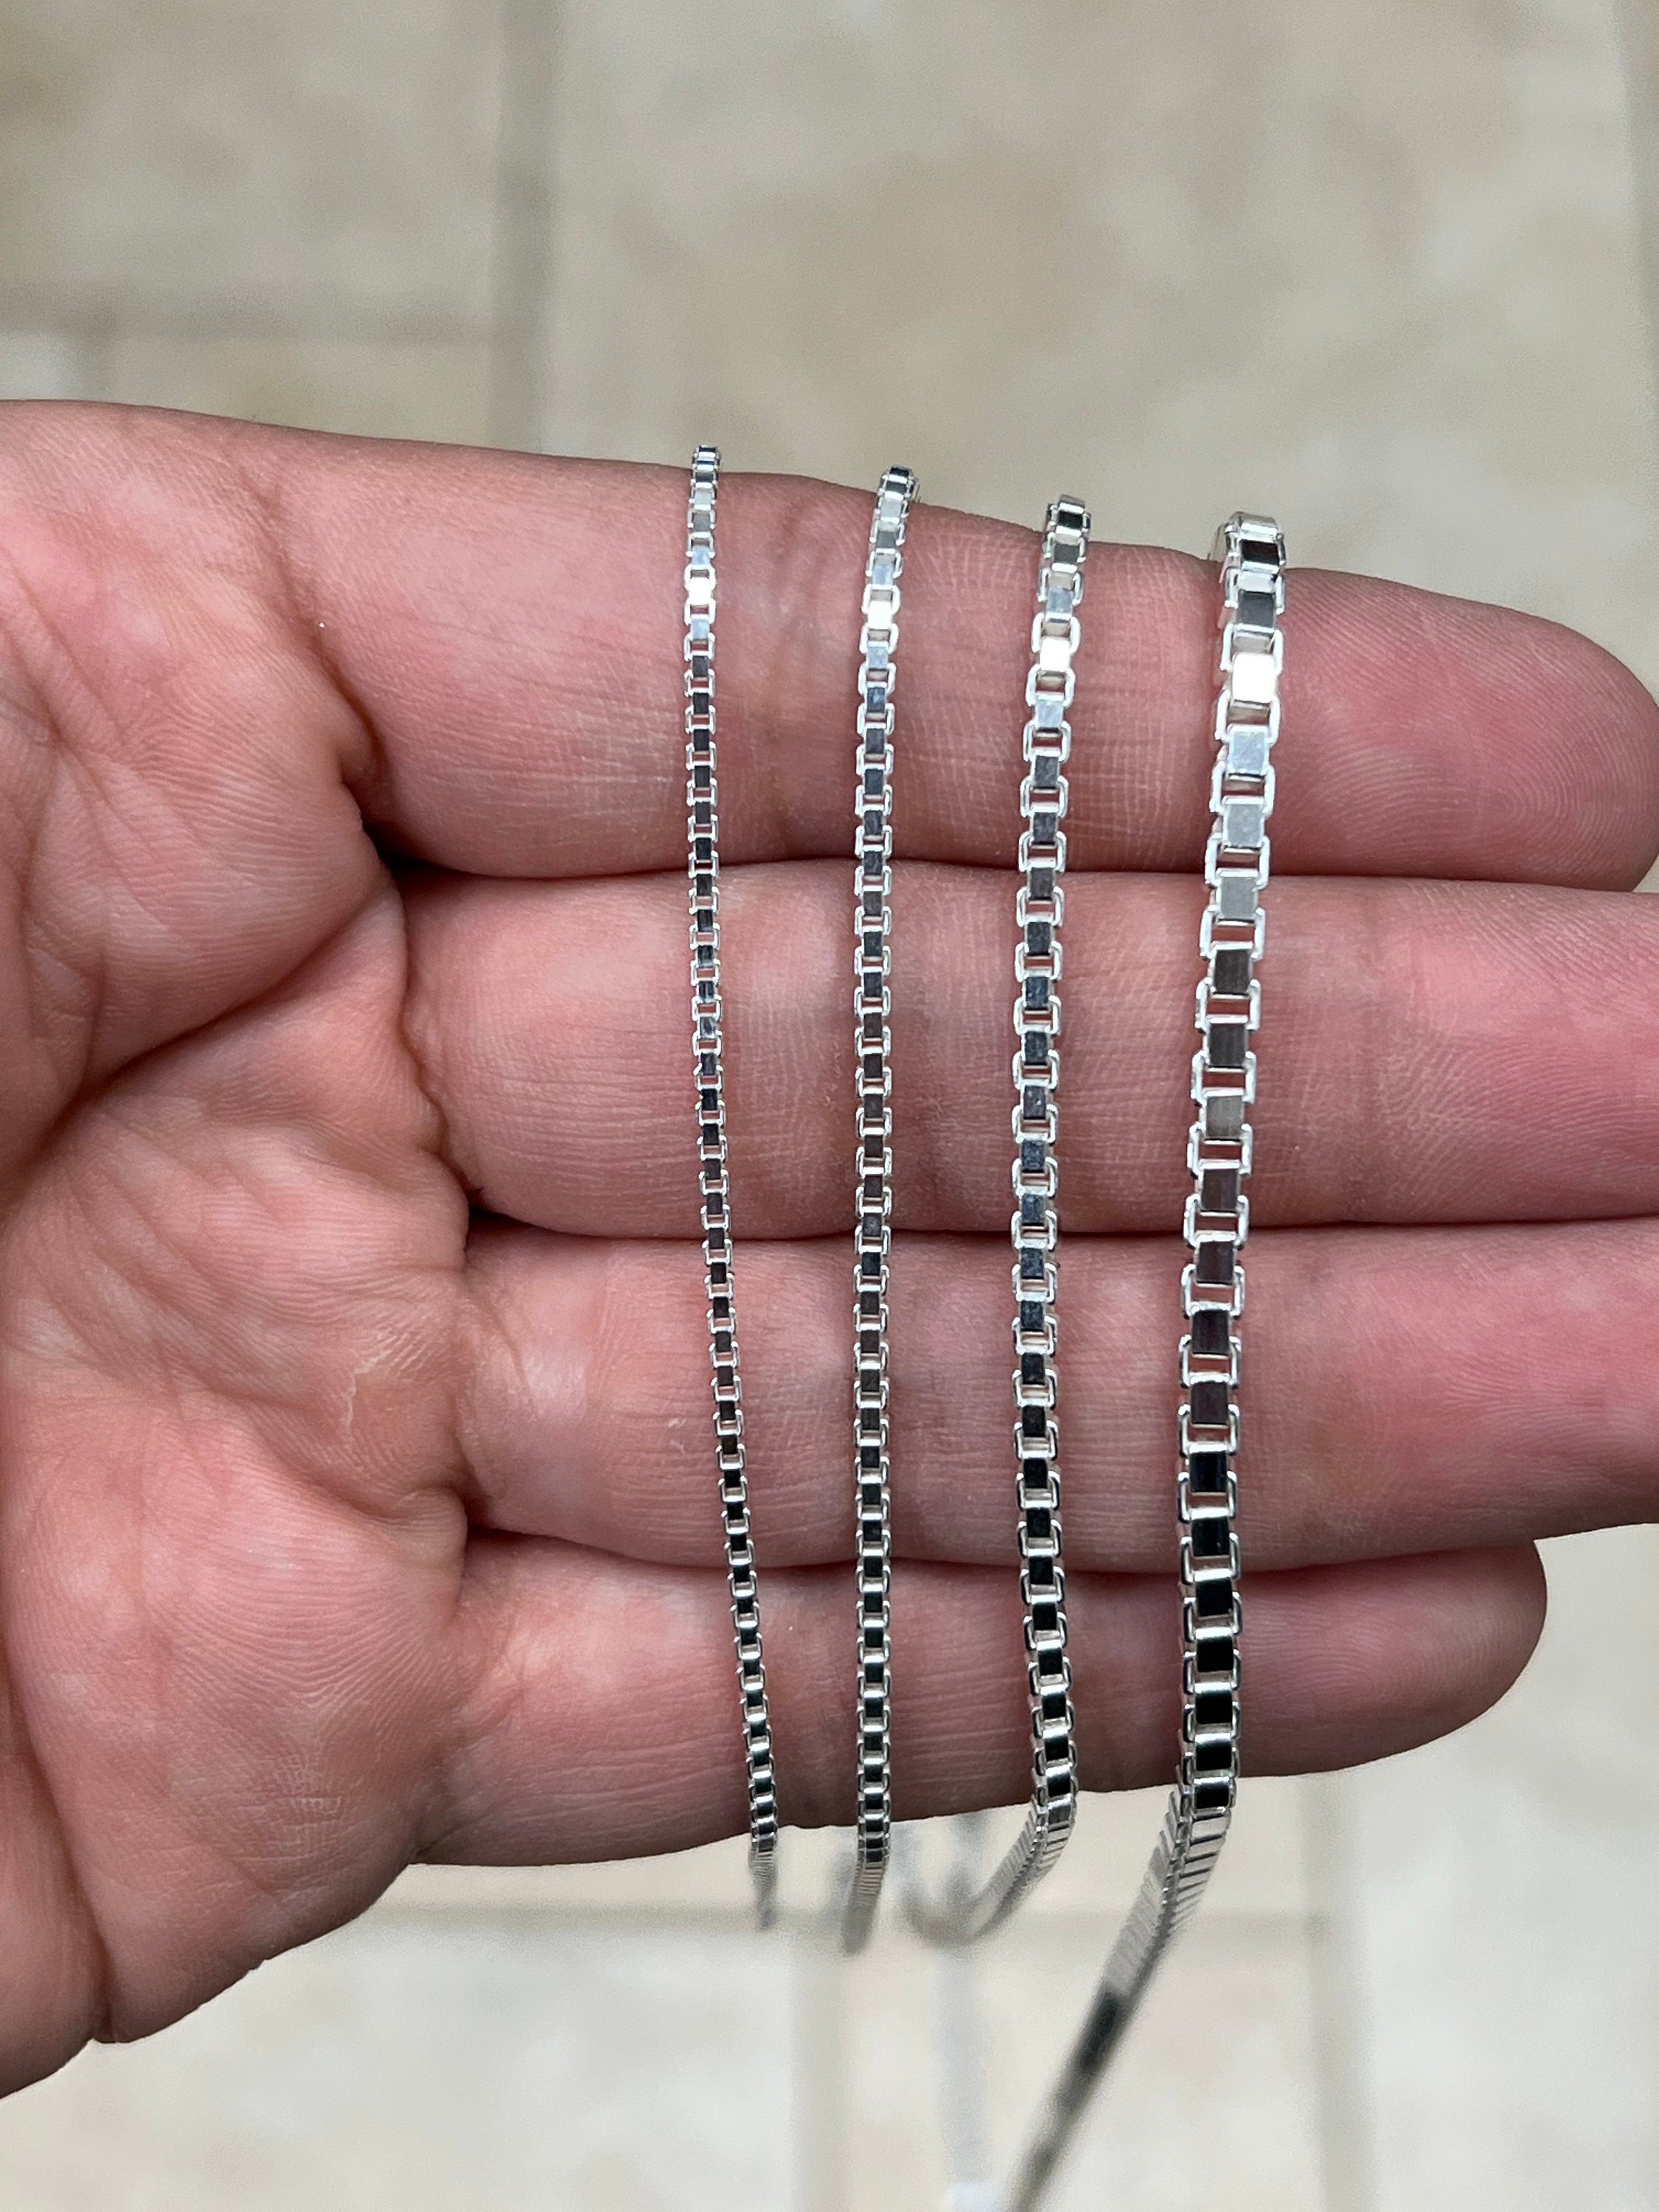 COIRIS 16.4 Feet Stainless Steel Box Chains 3MM Silver Rectangles Link  Chain Bulk for DIY Jewelry Making Silver Chain Rolls Handmaded Jewelry